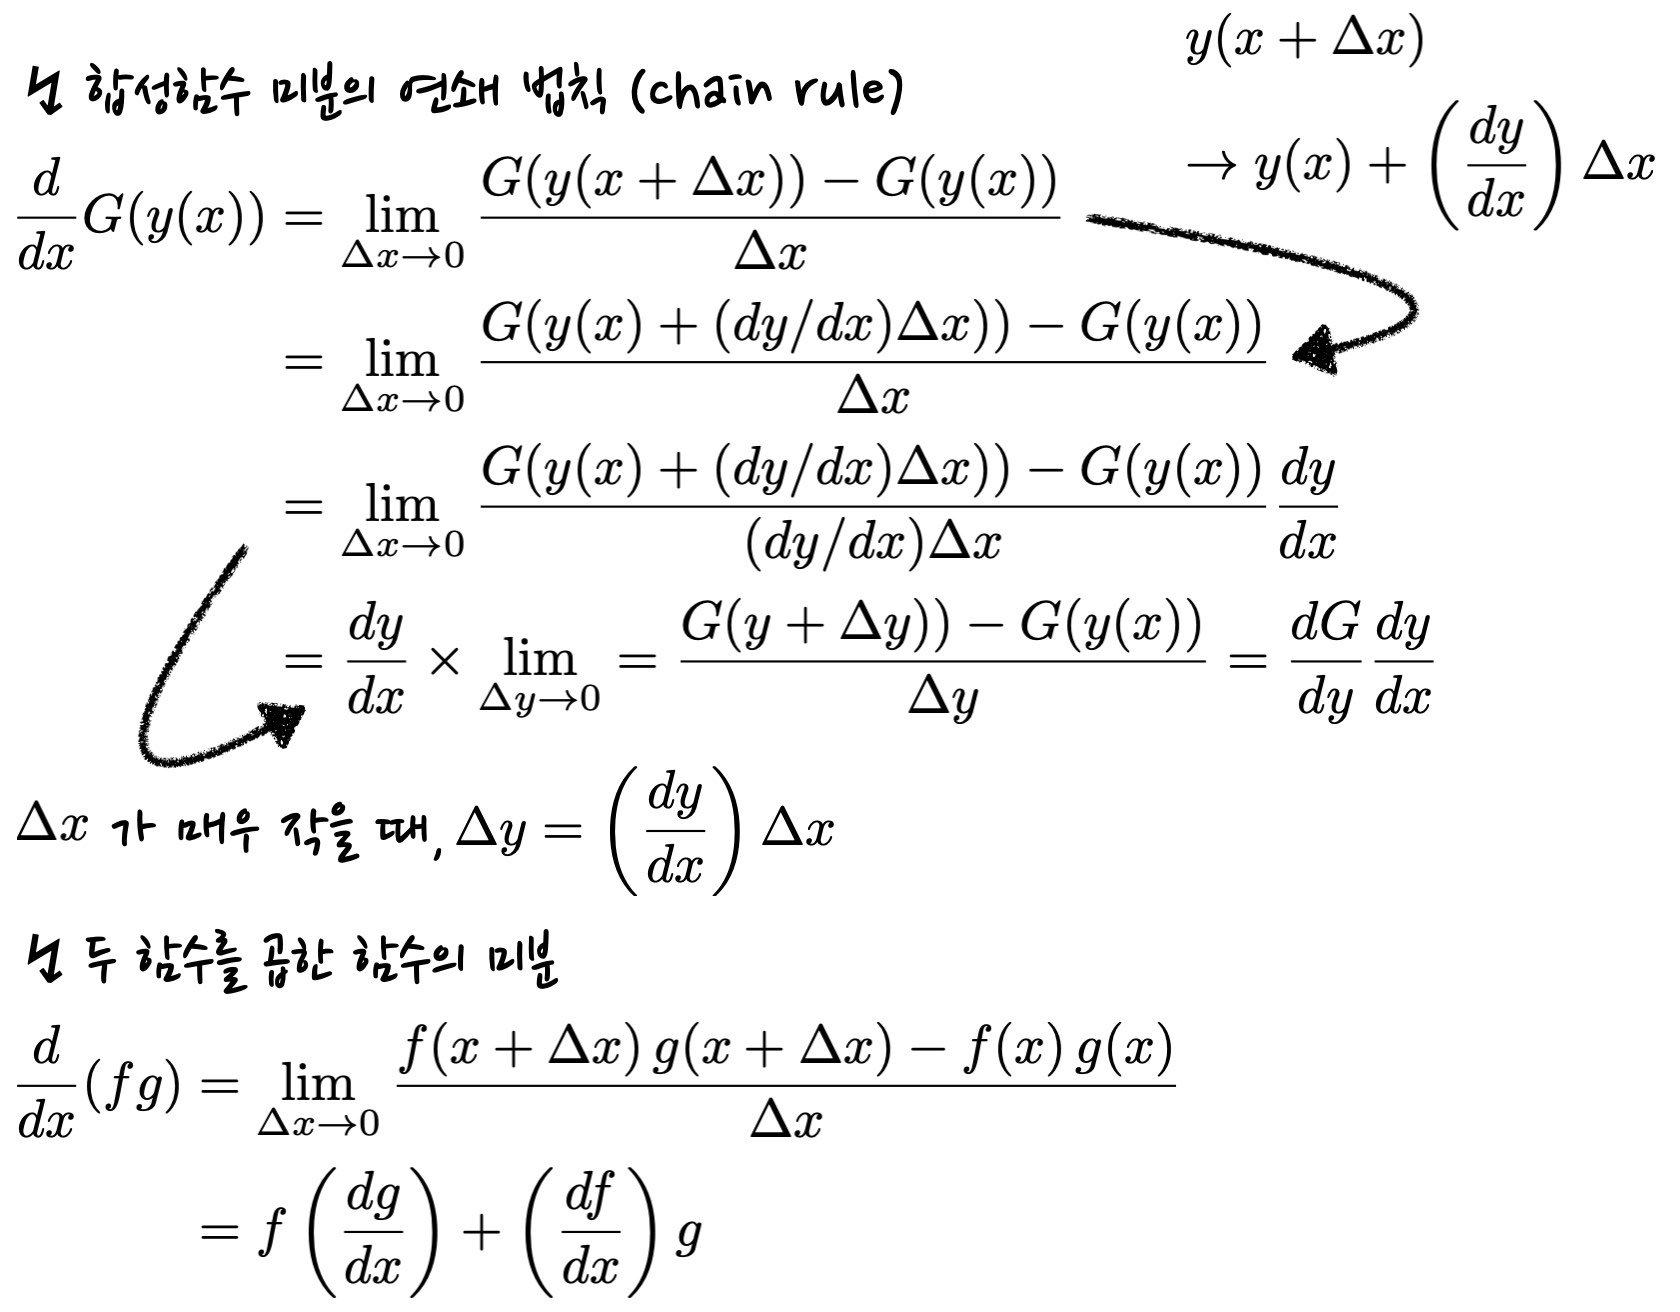 equation for definition of chain rule and derivatives of product of functions